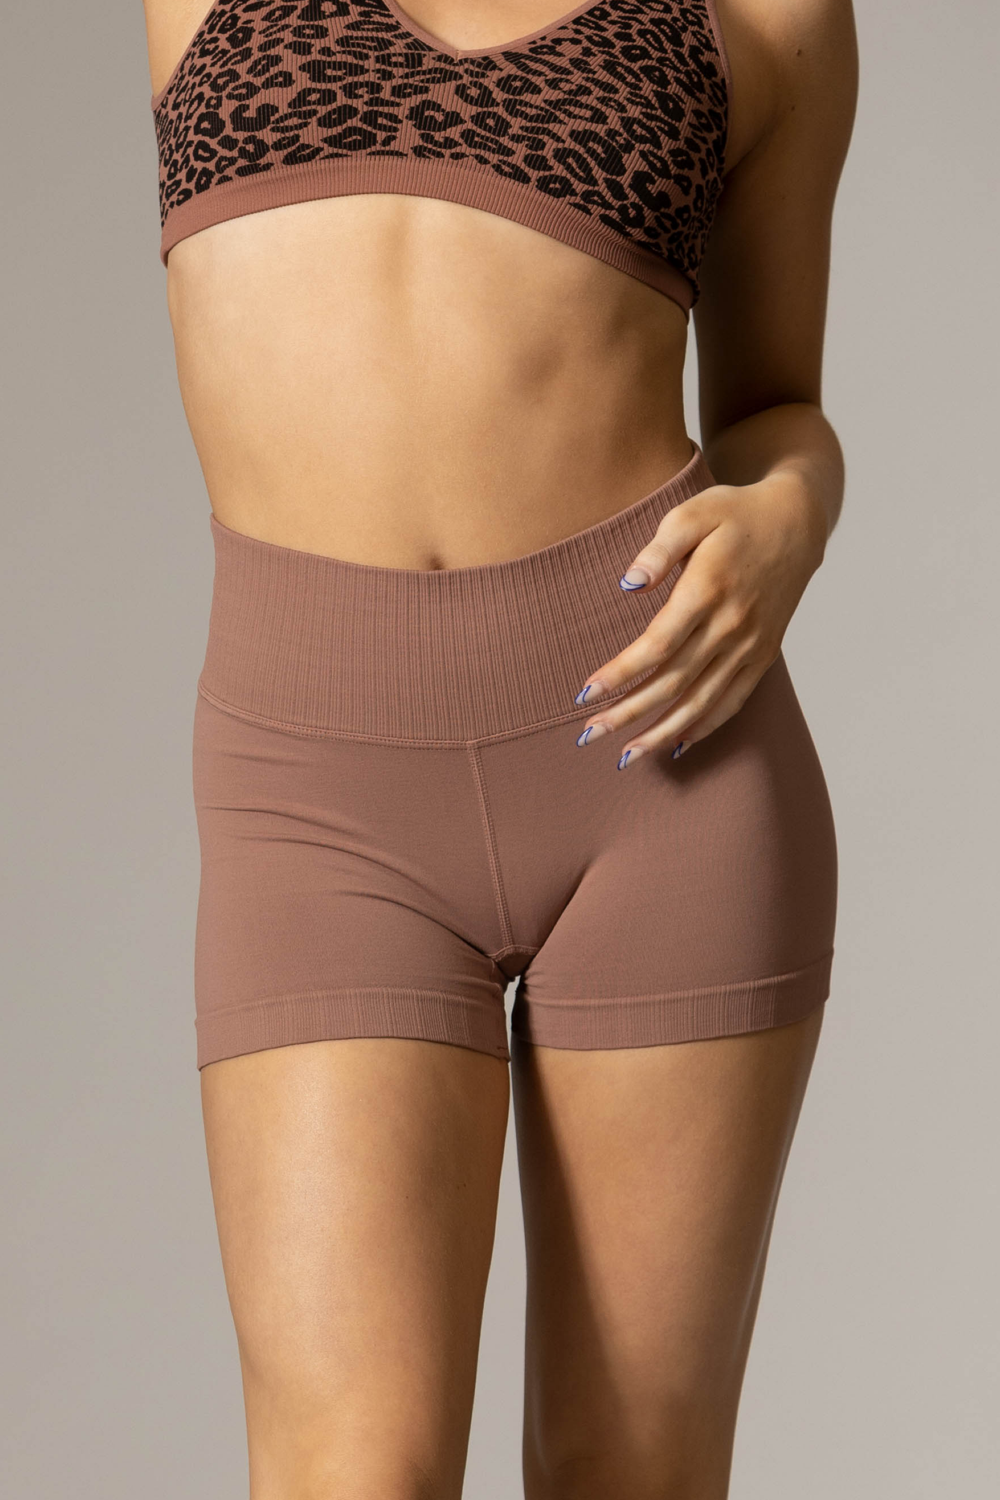 Tiger Friday Online Shop for Shortie Shocks - Cappuccino Dancewear | Size: Adult M-L